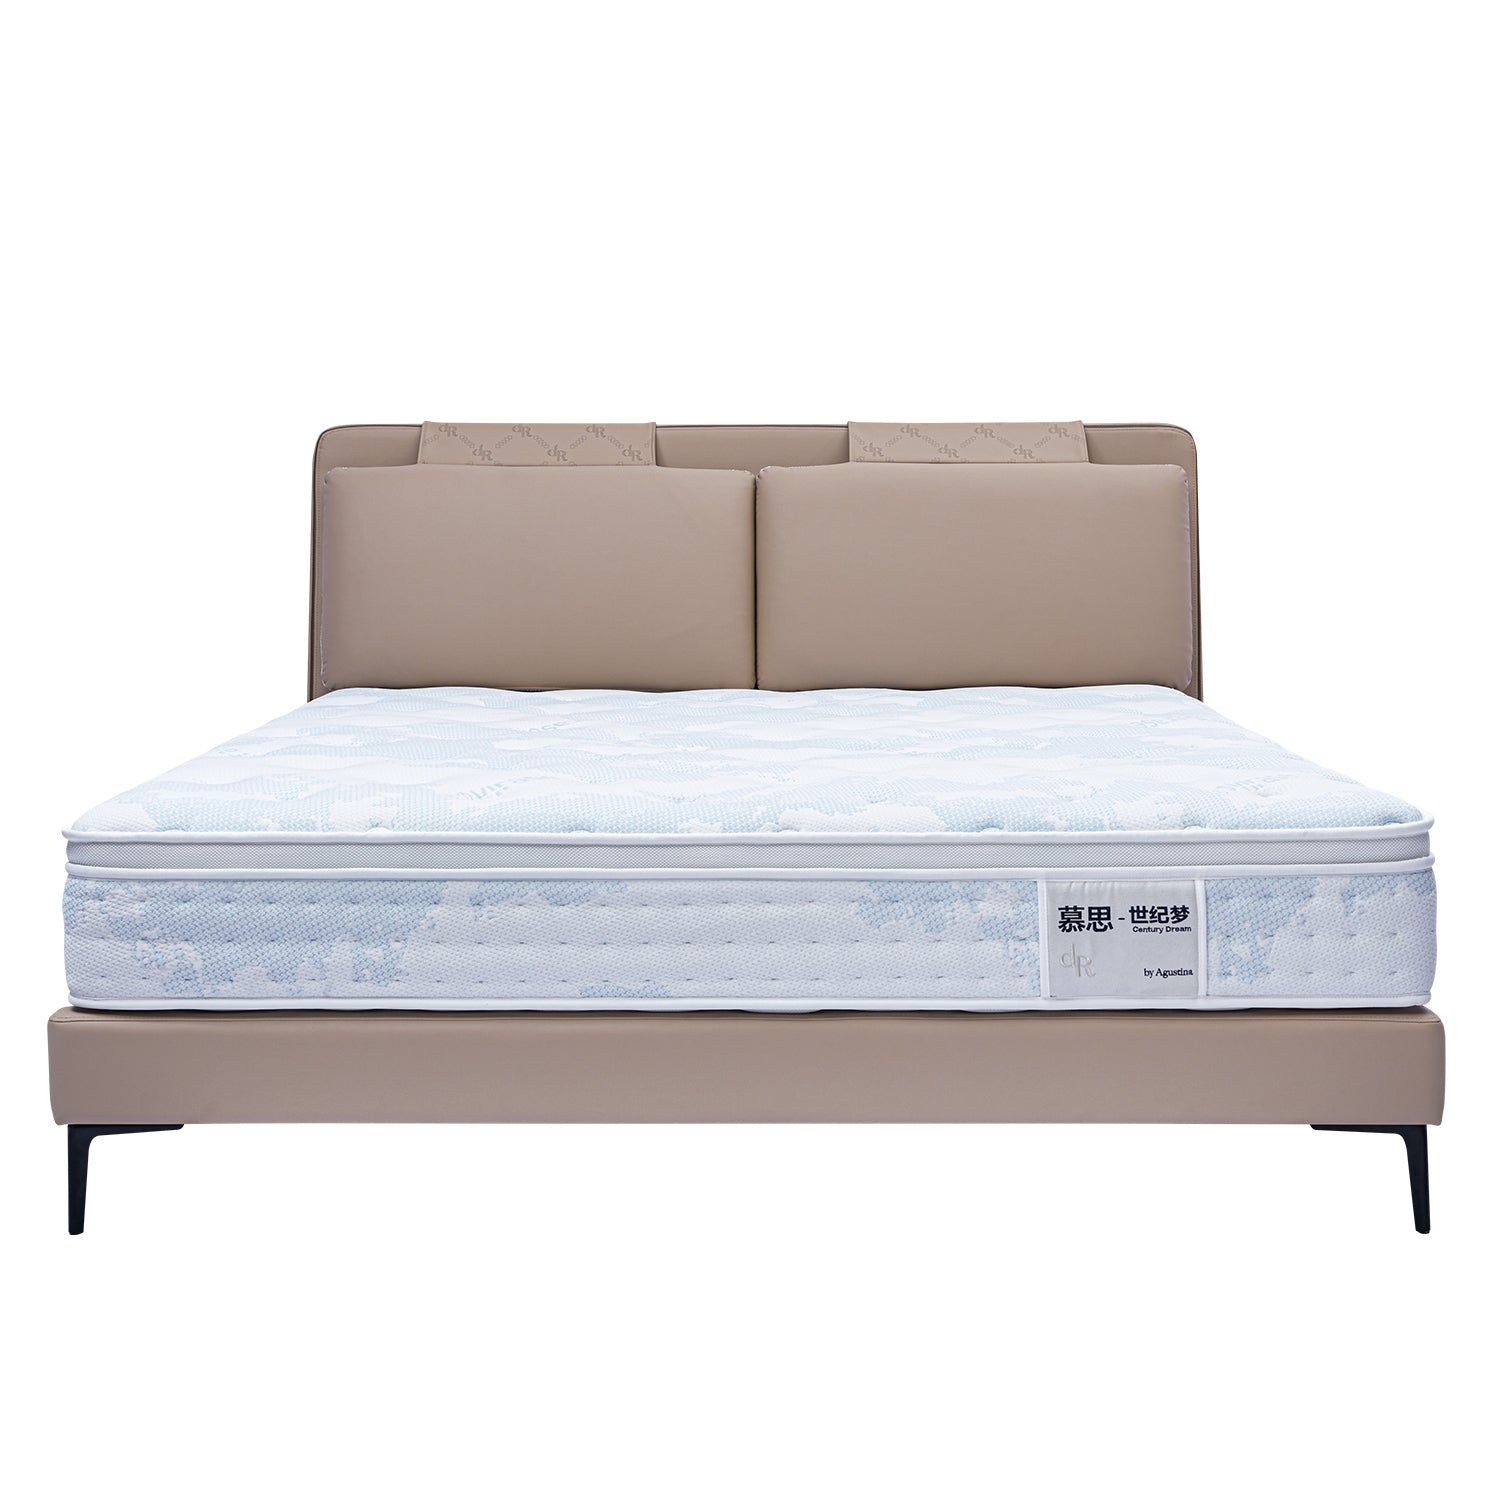 DeRUCCI bed frame BOC1-006 with beige leather upholstery and white patterned mattress